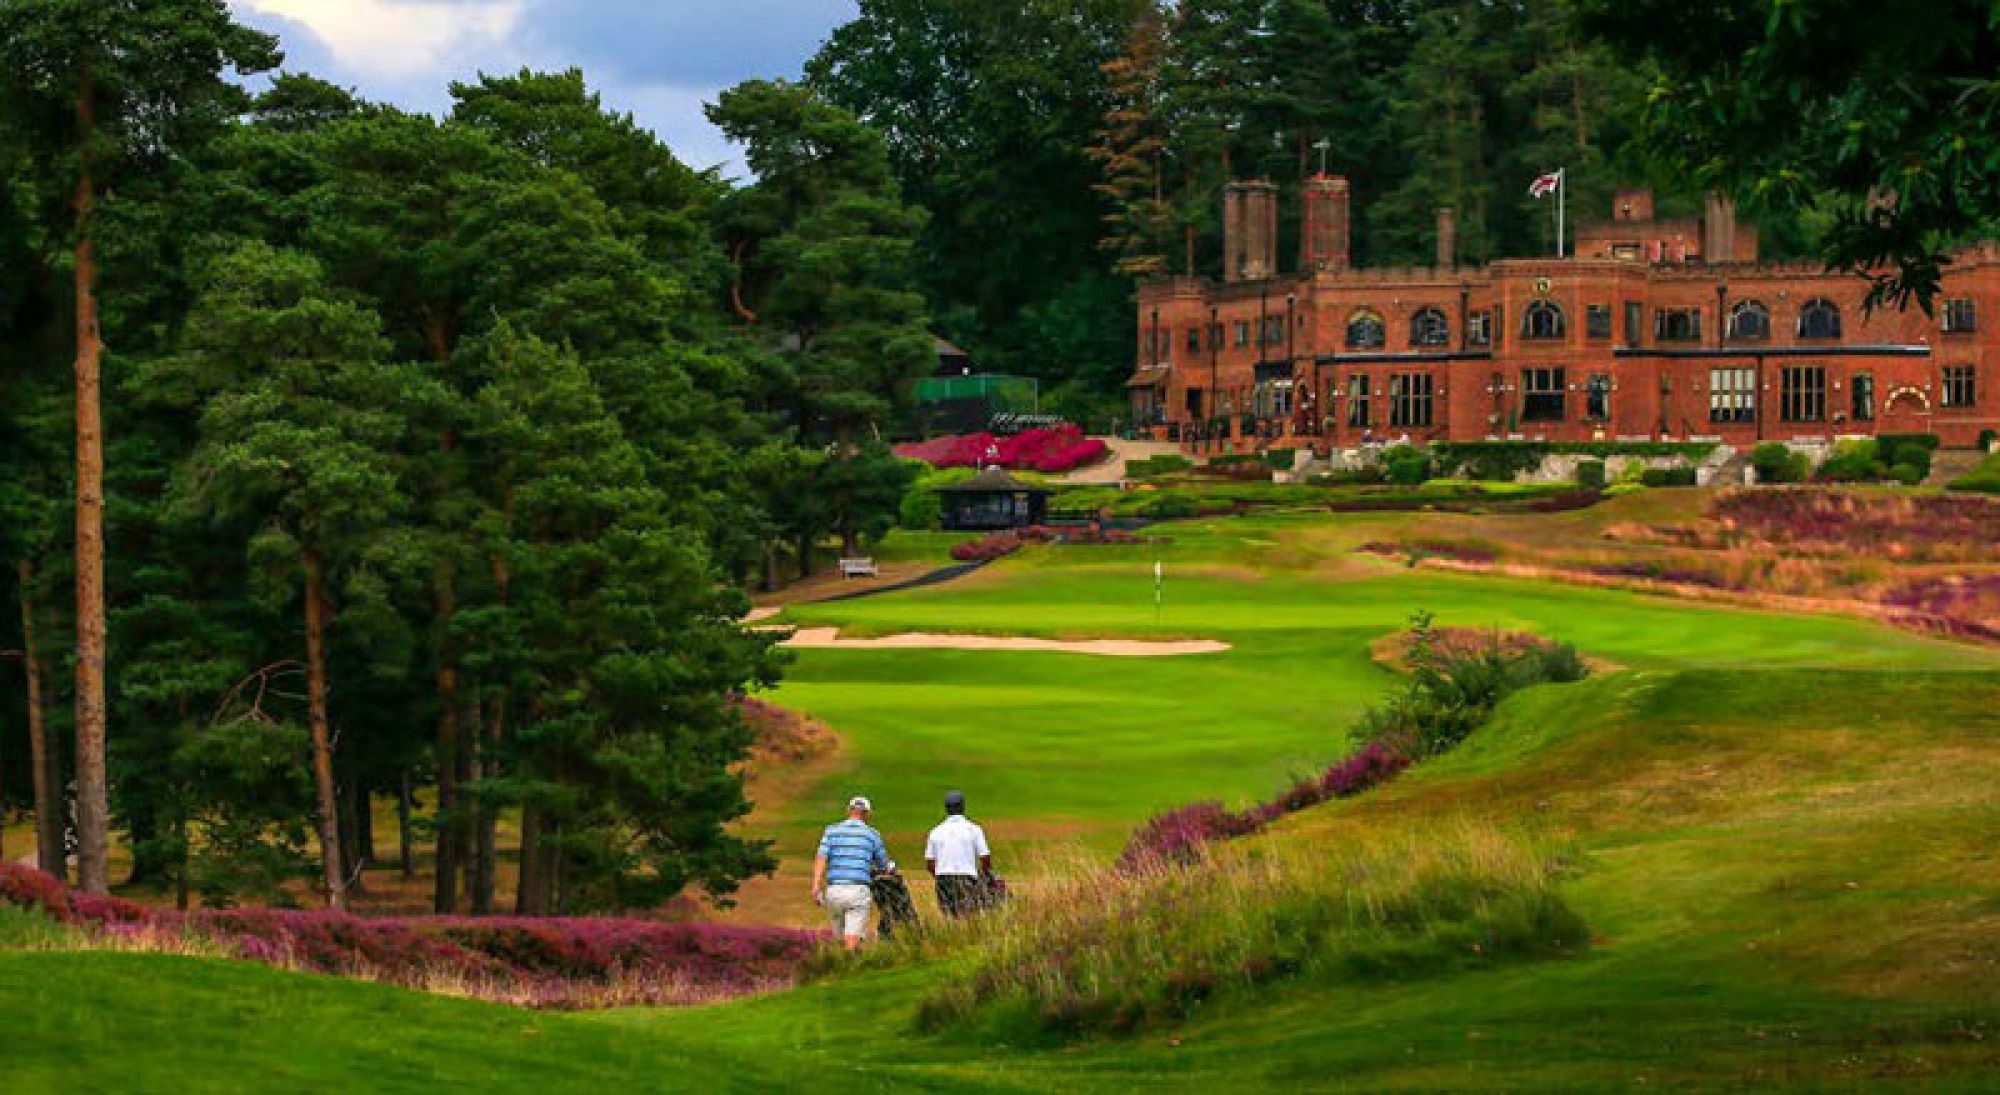 The St George's Hill Golf Club's lovely golf course within sensational Surrey.